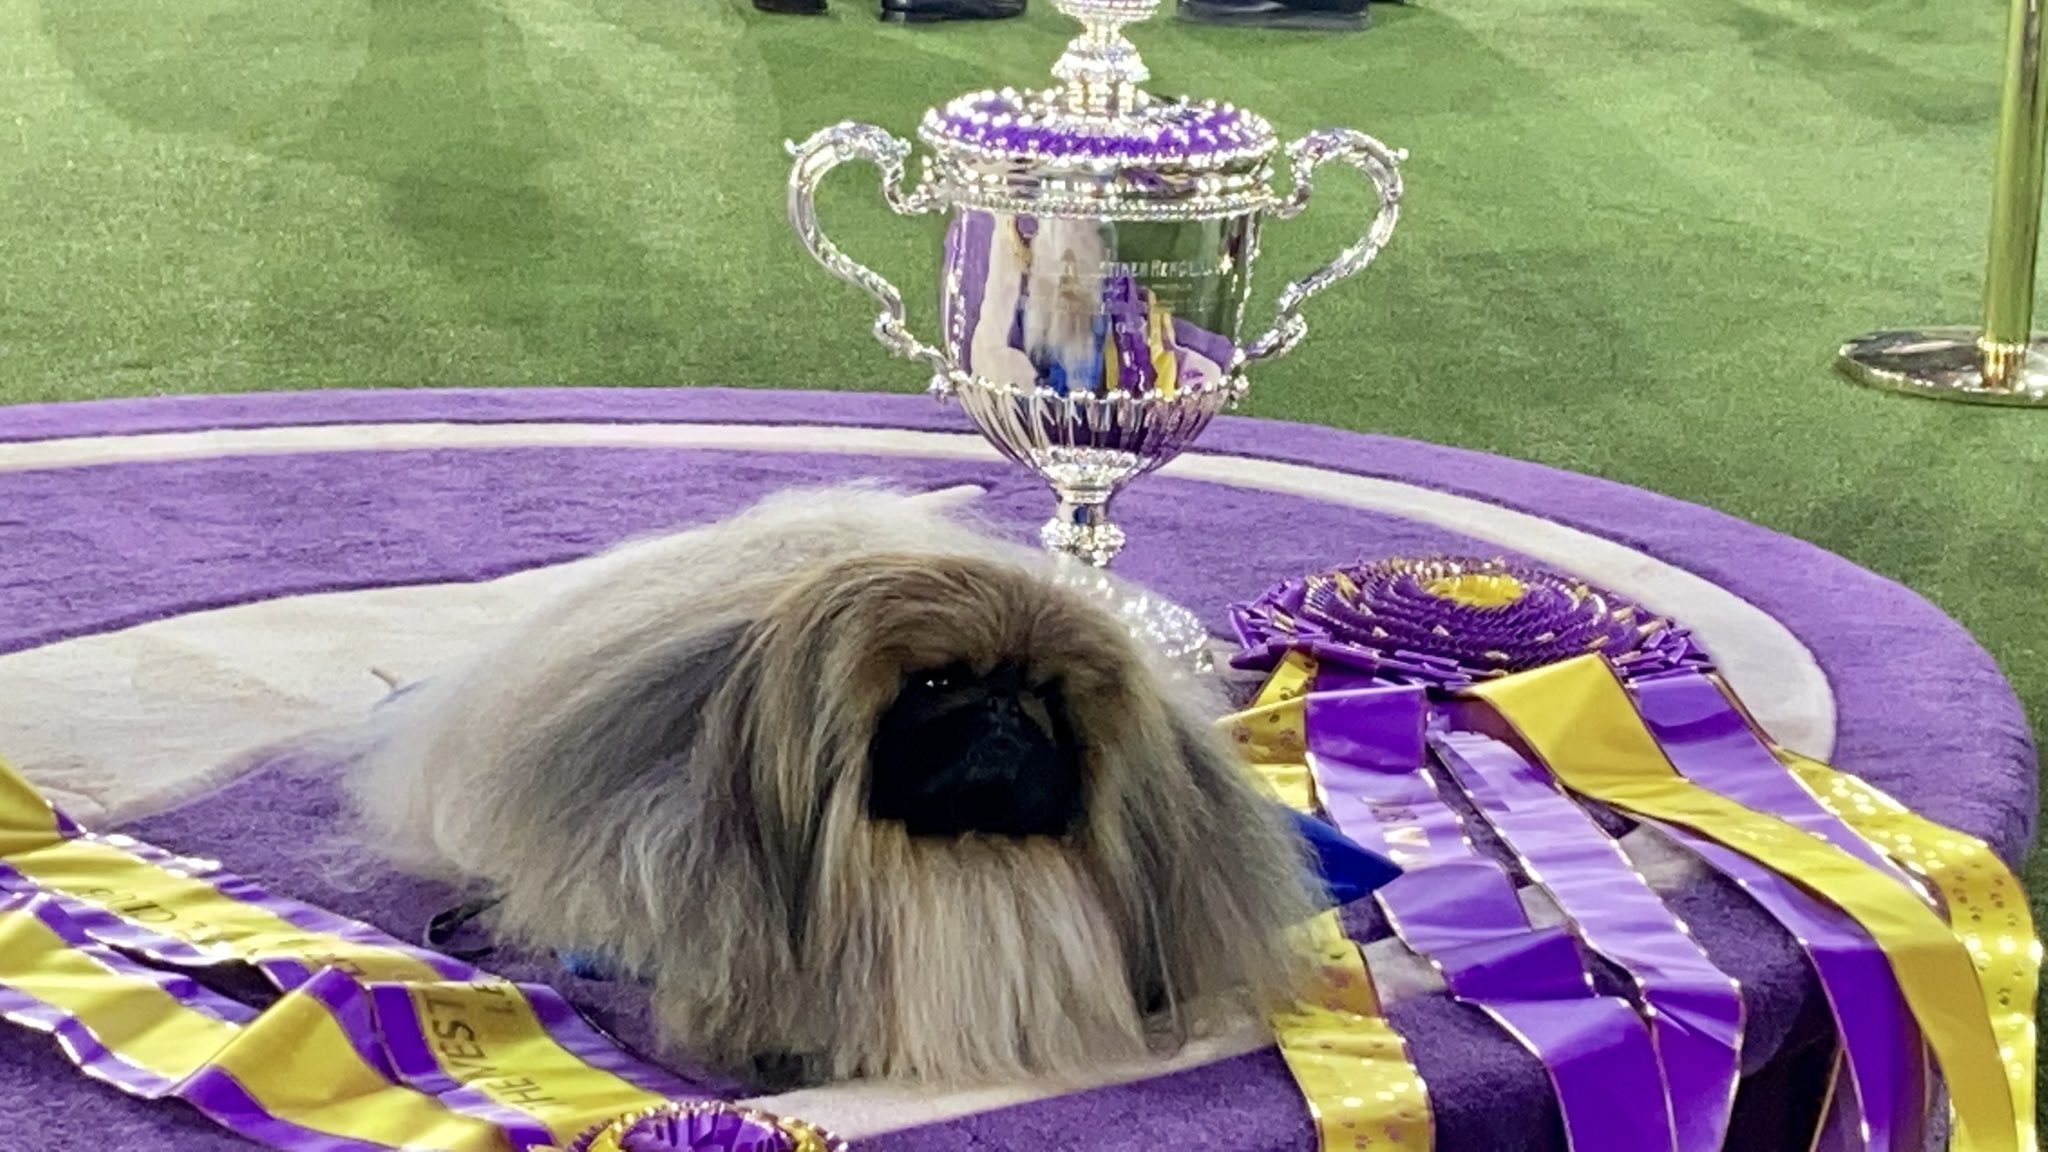 Best in show at the 2021 Westminster Kennel Club Dog Show goes to… DogTails